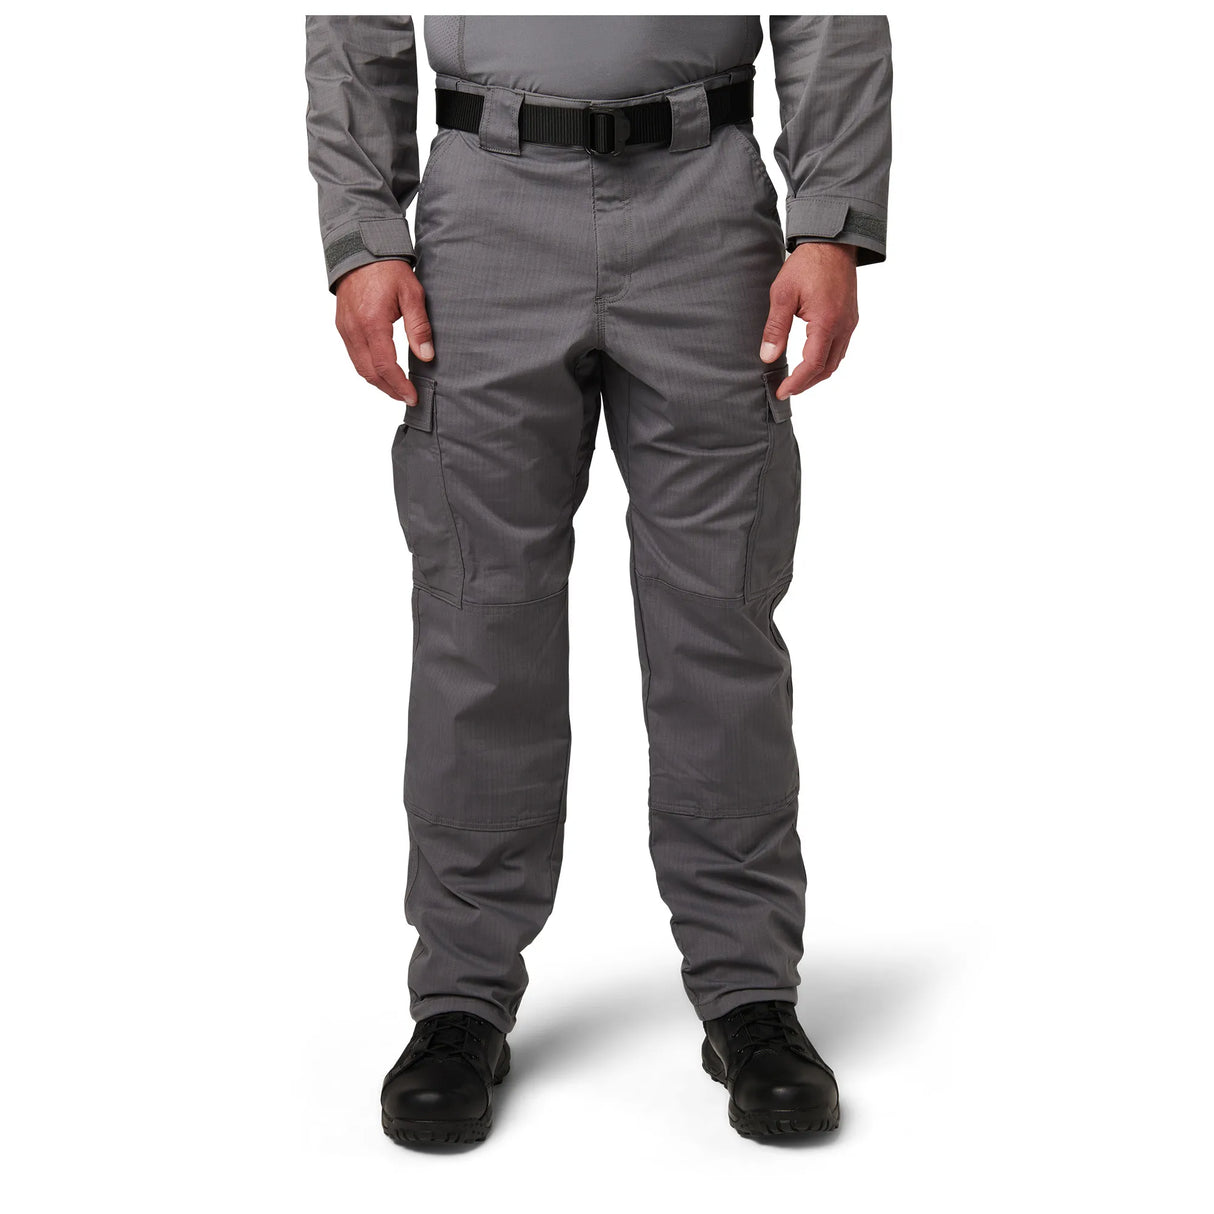 Alt: 5.11 TDU® Pant - Durable Flex-Tac® fabric, self-adjusting waistband, reinforced seat/knees, pleated cargo pockets with TacTec™ compatibility. (125)